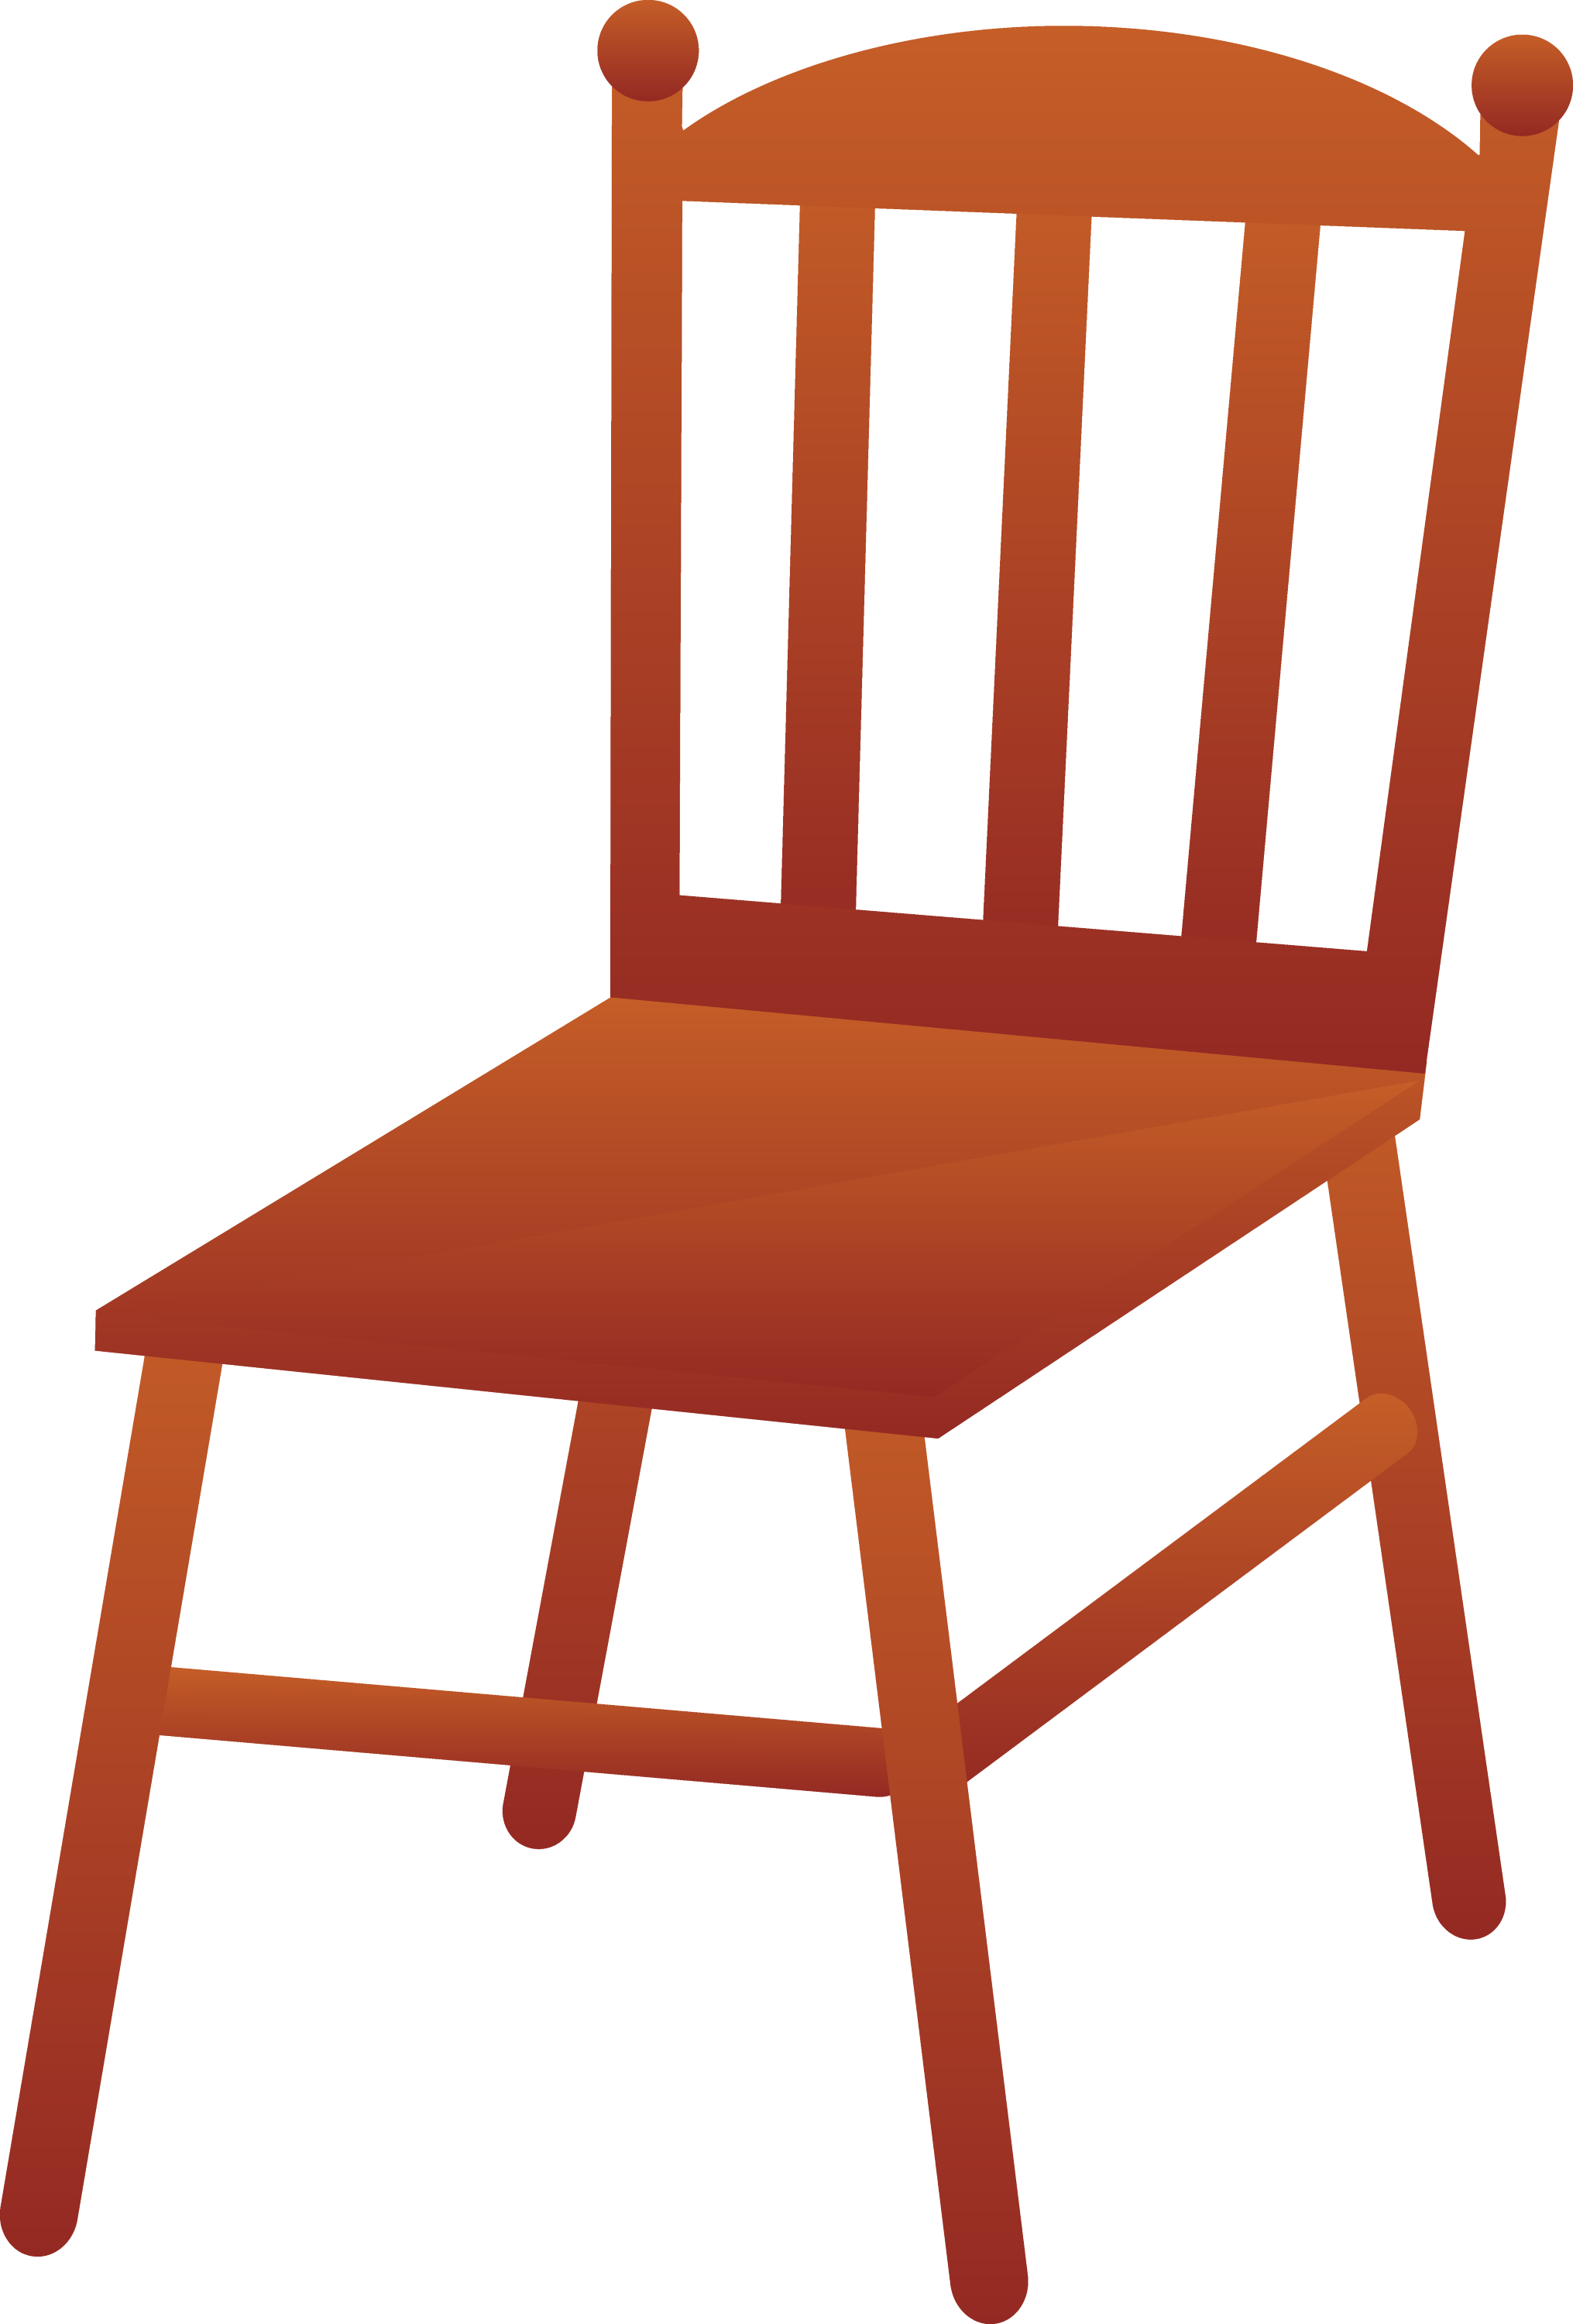 chairs clipart free - photo #19